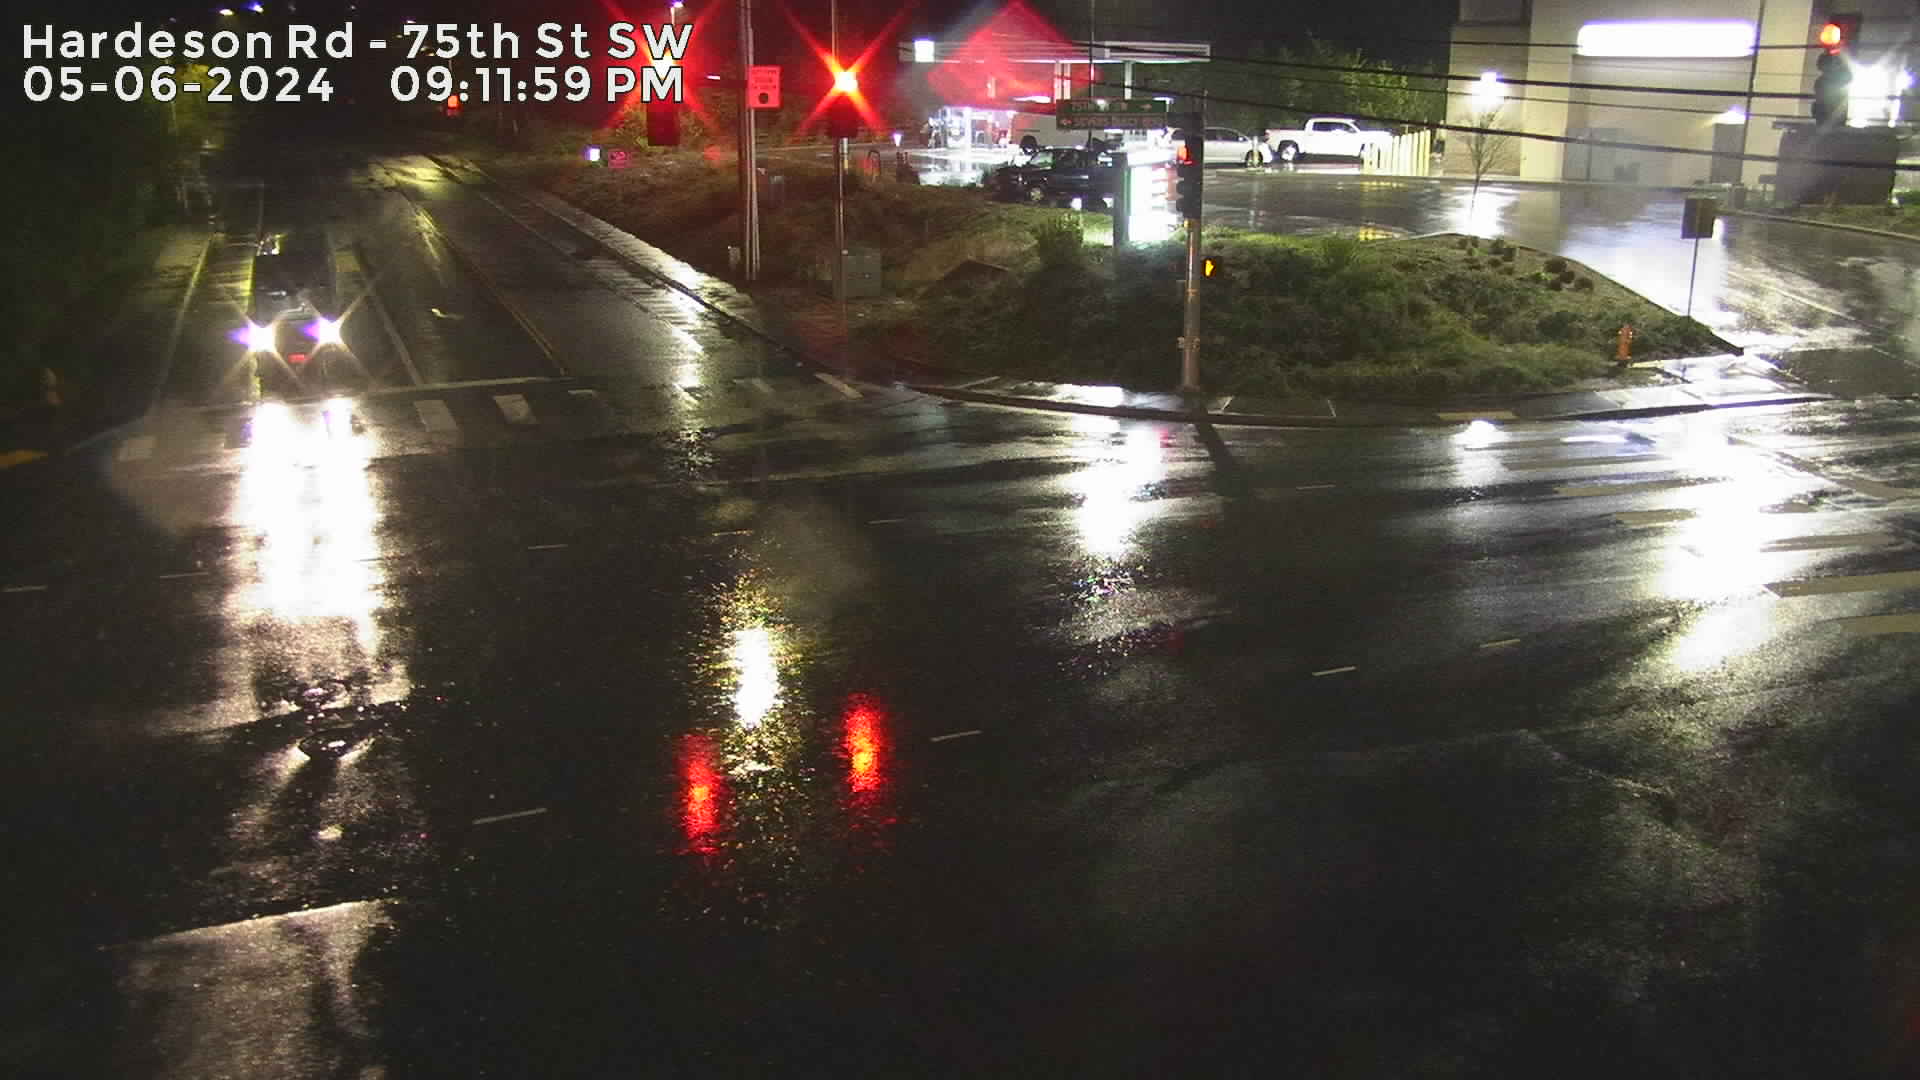 Camera at Hardeson Rd and 75th St SW